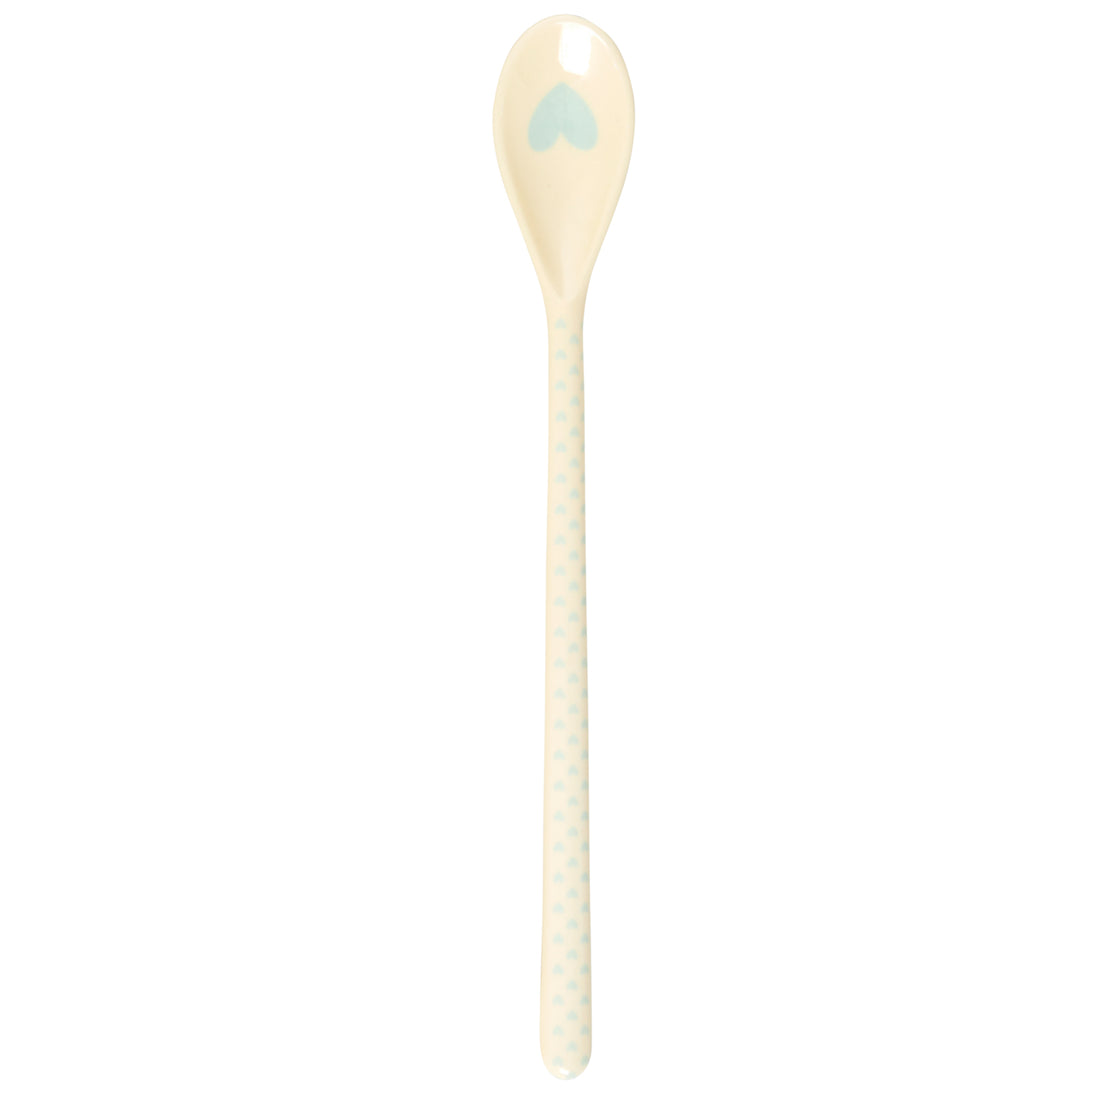 rice-dk-melamine-latte-spoon-with-hearts-prints-soft-blue-rice-melsp-lfavxcpdmi-